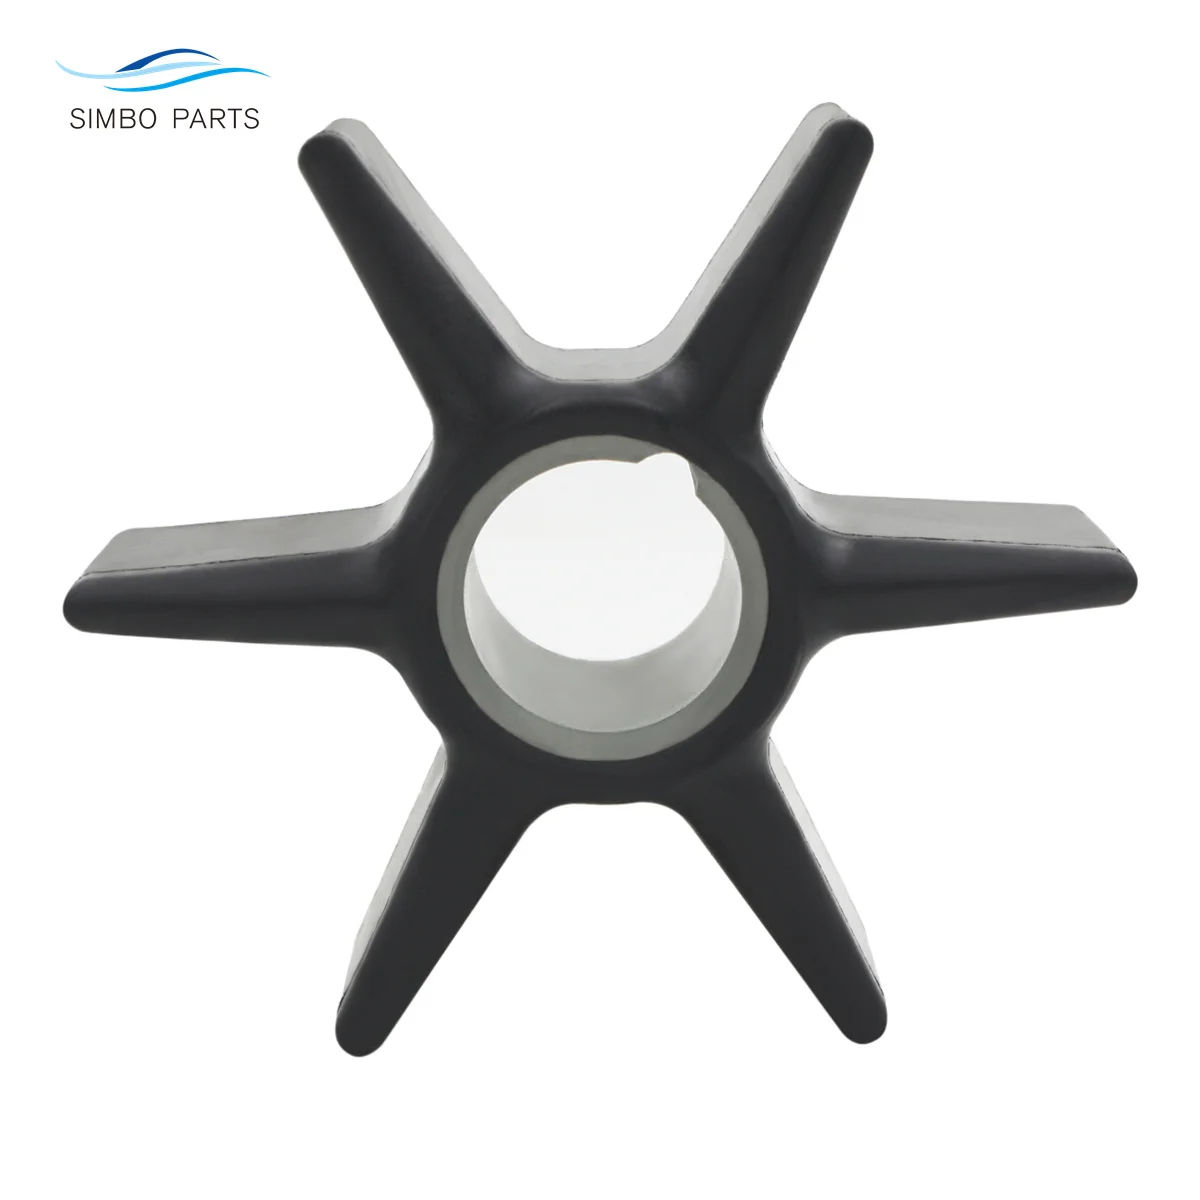 

19210-ZW1 Water Pump Impeller For Honda Marine Outboard BF 75 90 A HP Motor 19210-ZW1-003 Sierra 18-3056